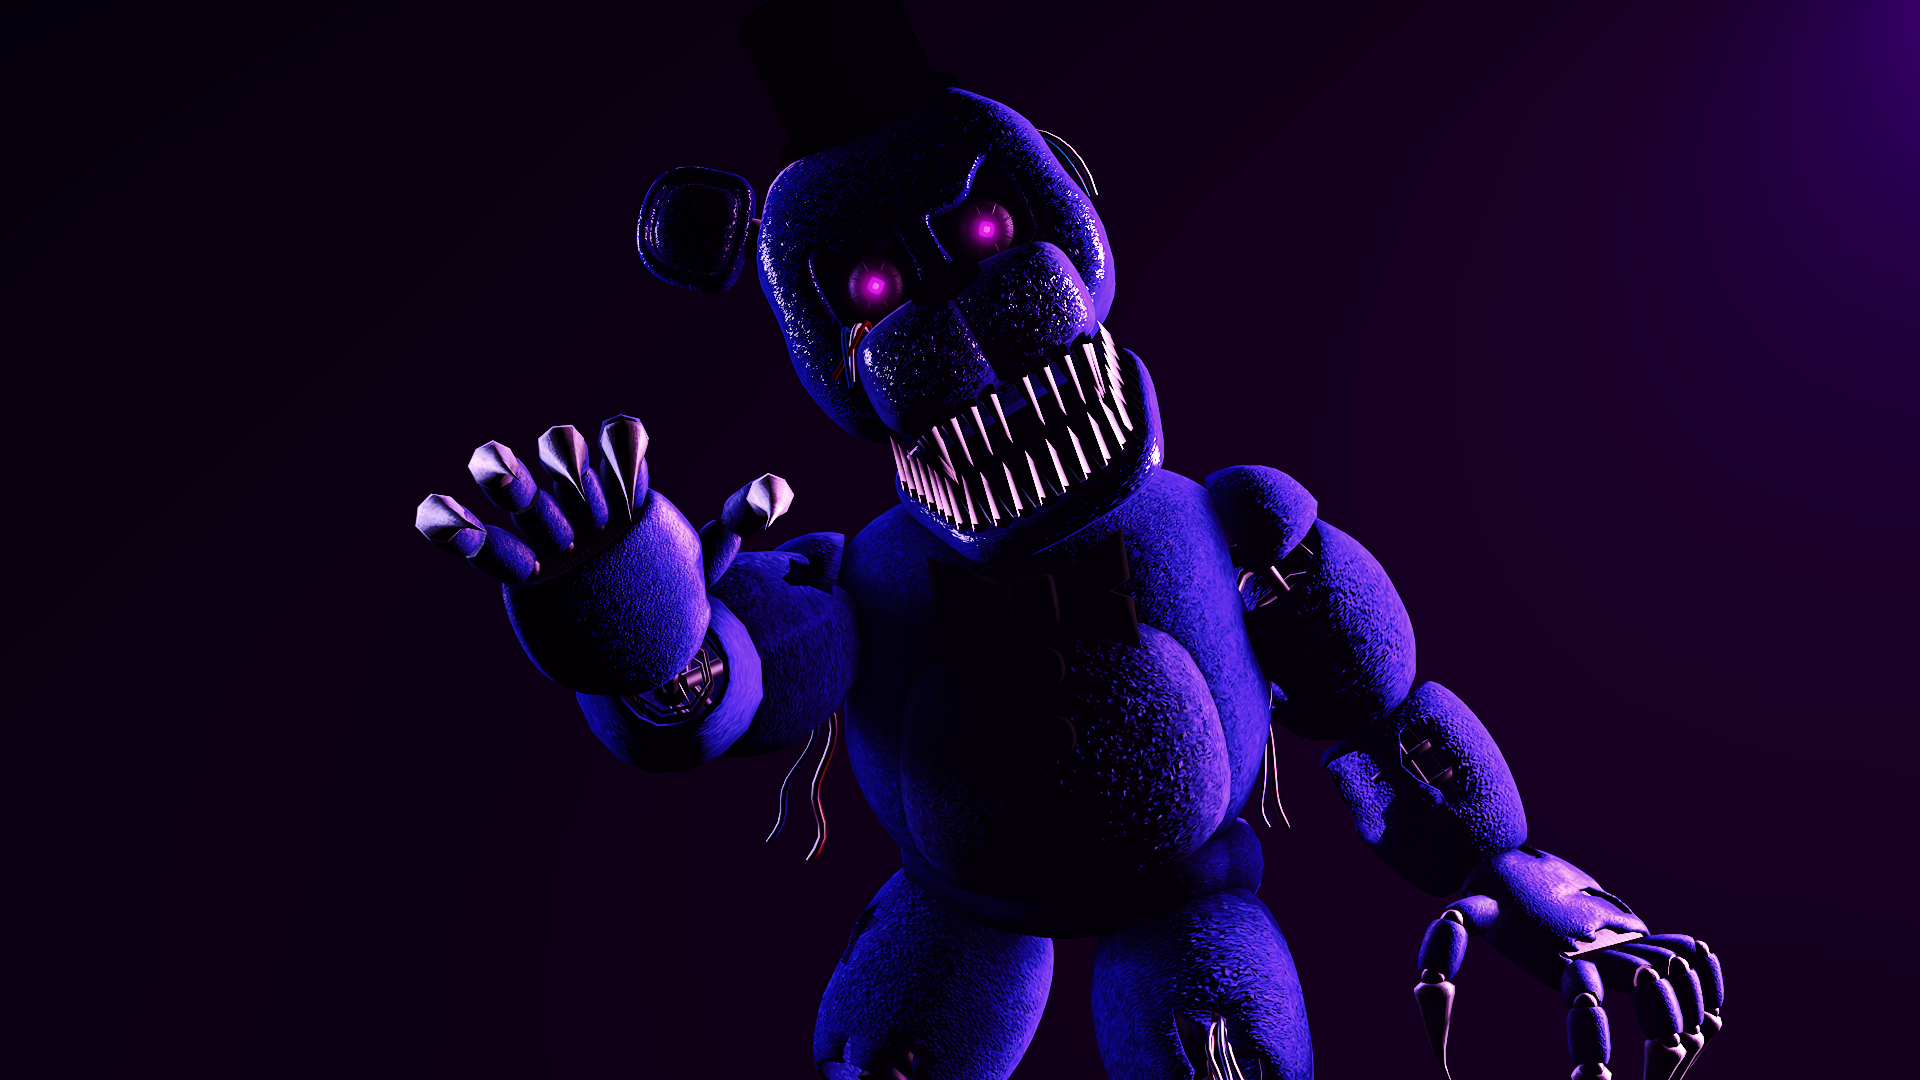 I decided to make a Sinister Shadow Freddy poster too